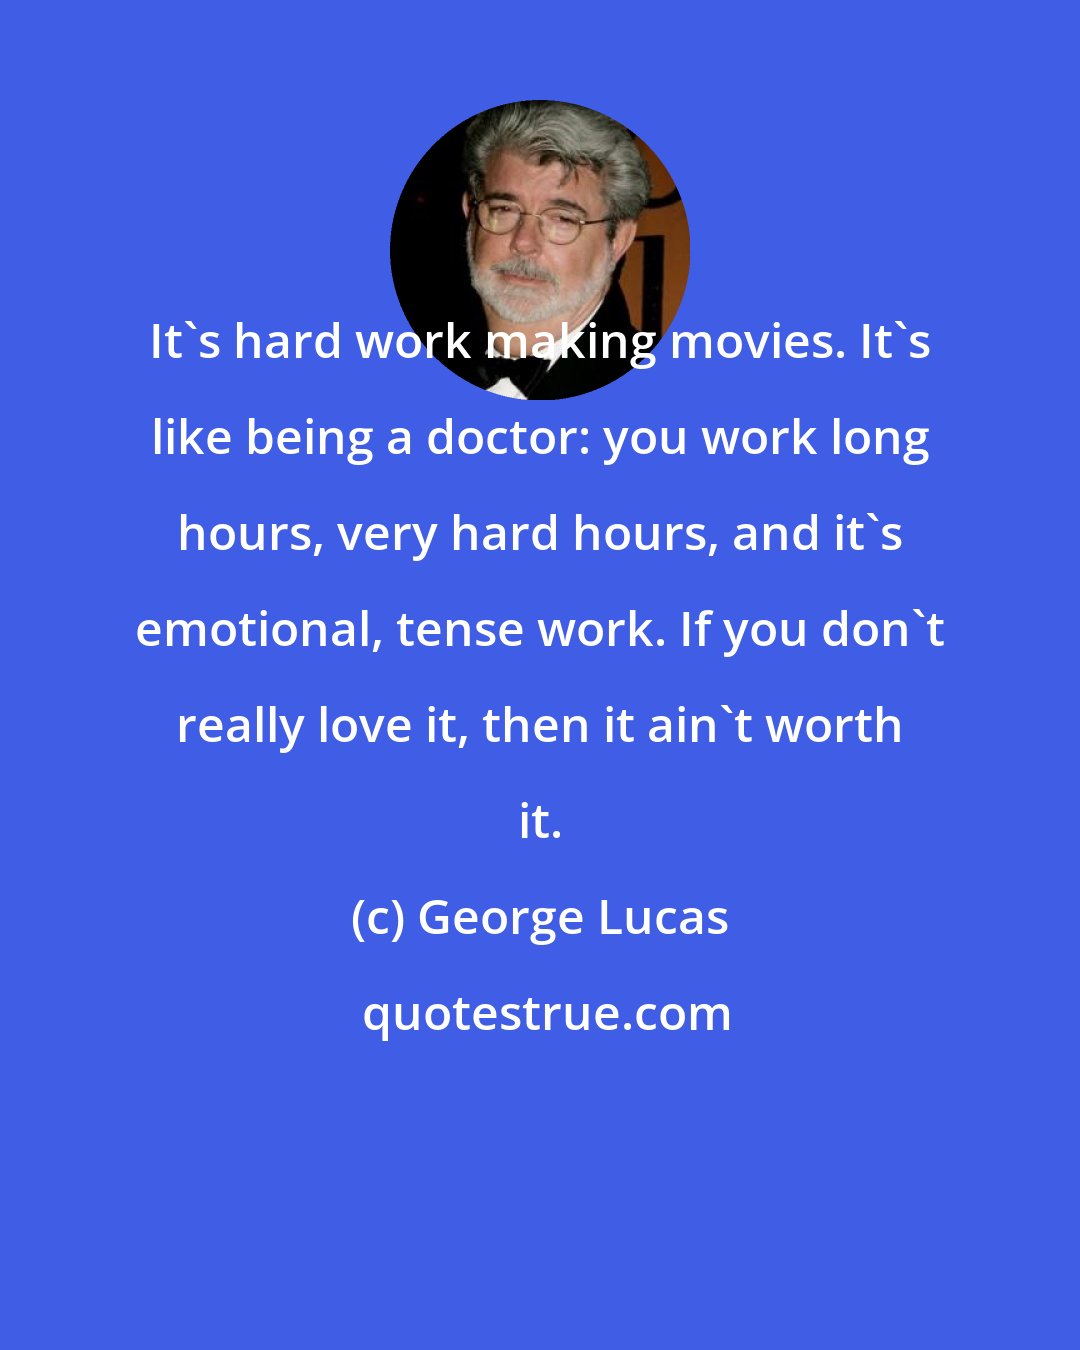 George Lucas: It's hard work making movies. It's like being a doctor: you work long hours, very hard hours, and it's emotional, tense work. If you don't really love it, then it ain't worth it.